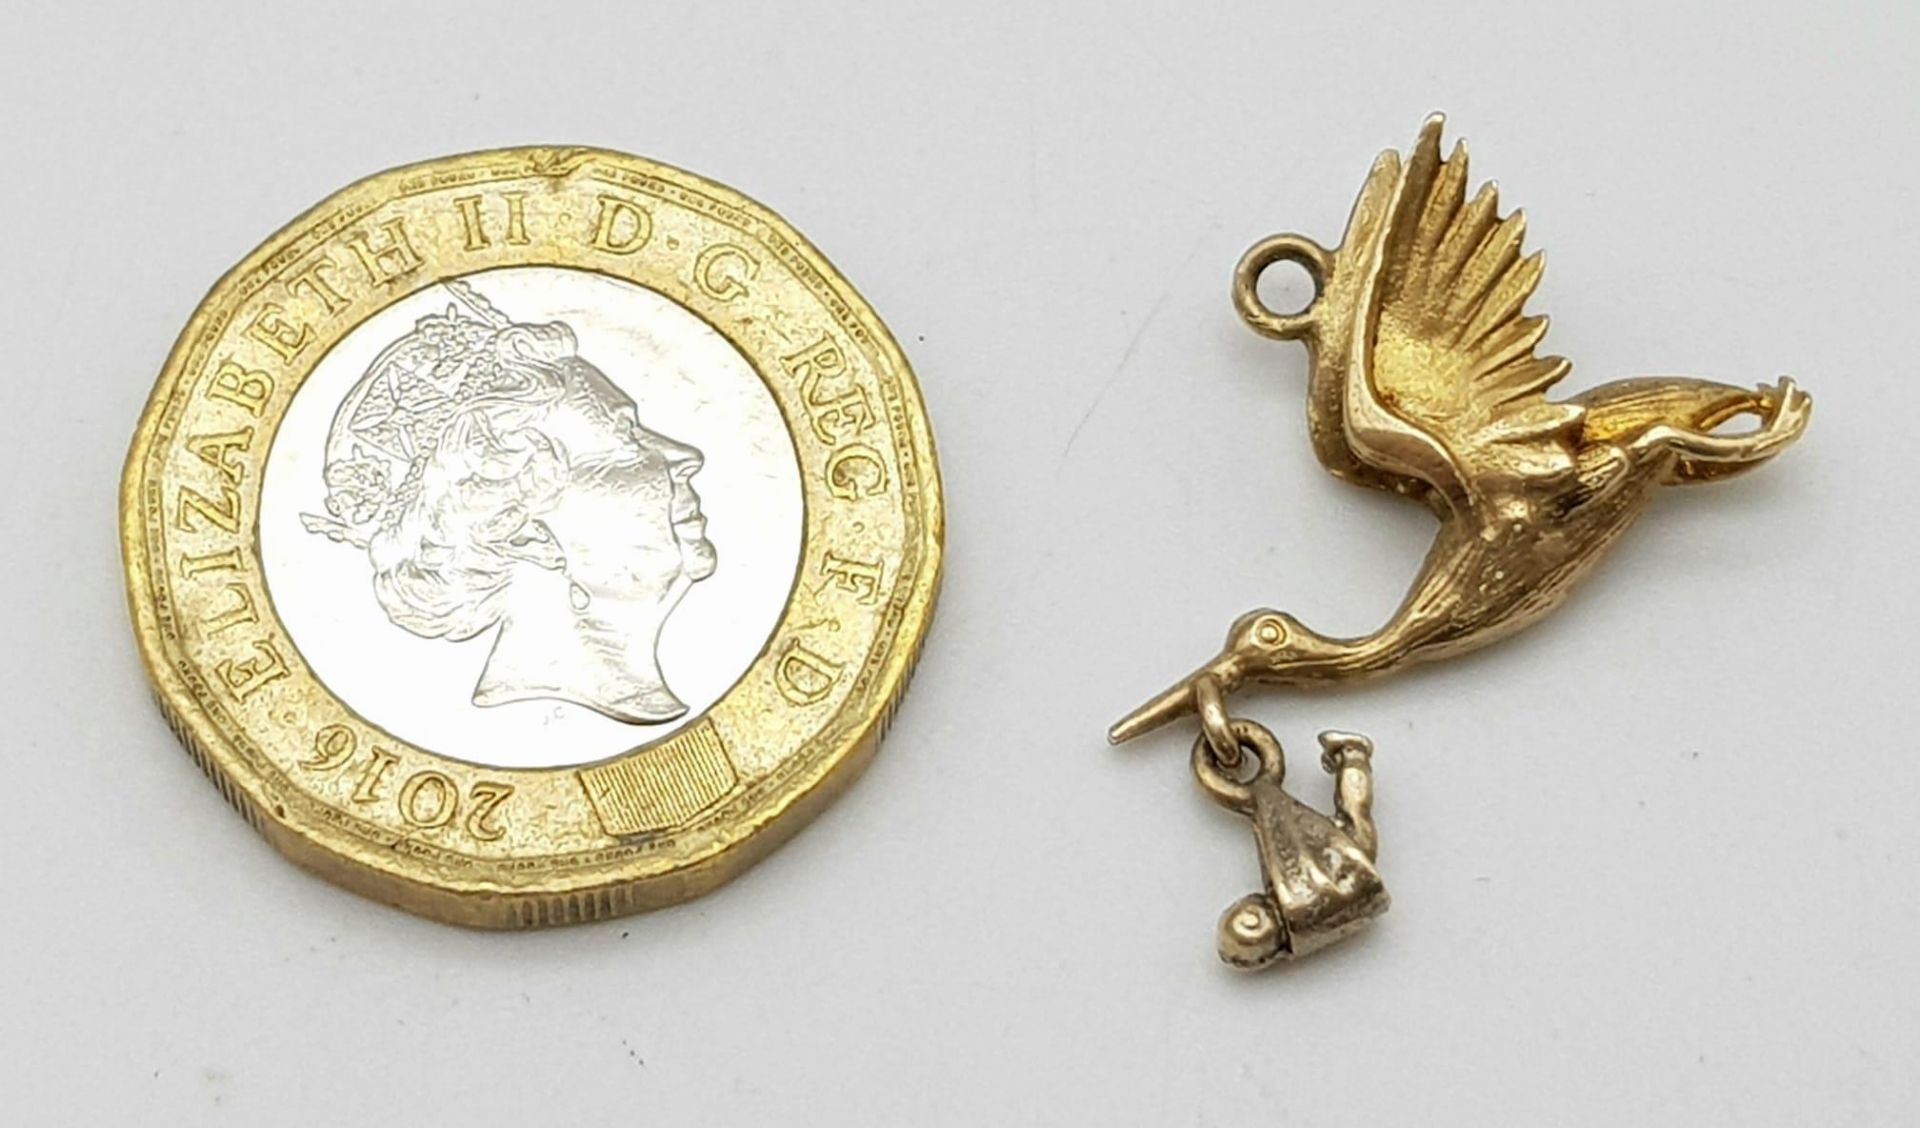 A 9K Yellow Gold Stork and Baby Pendant/Charm. 25mm. 2.35g weight. - Image 4 of 4